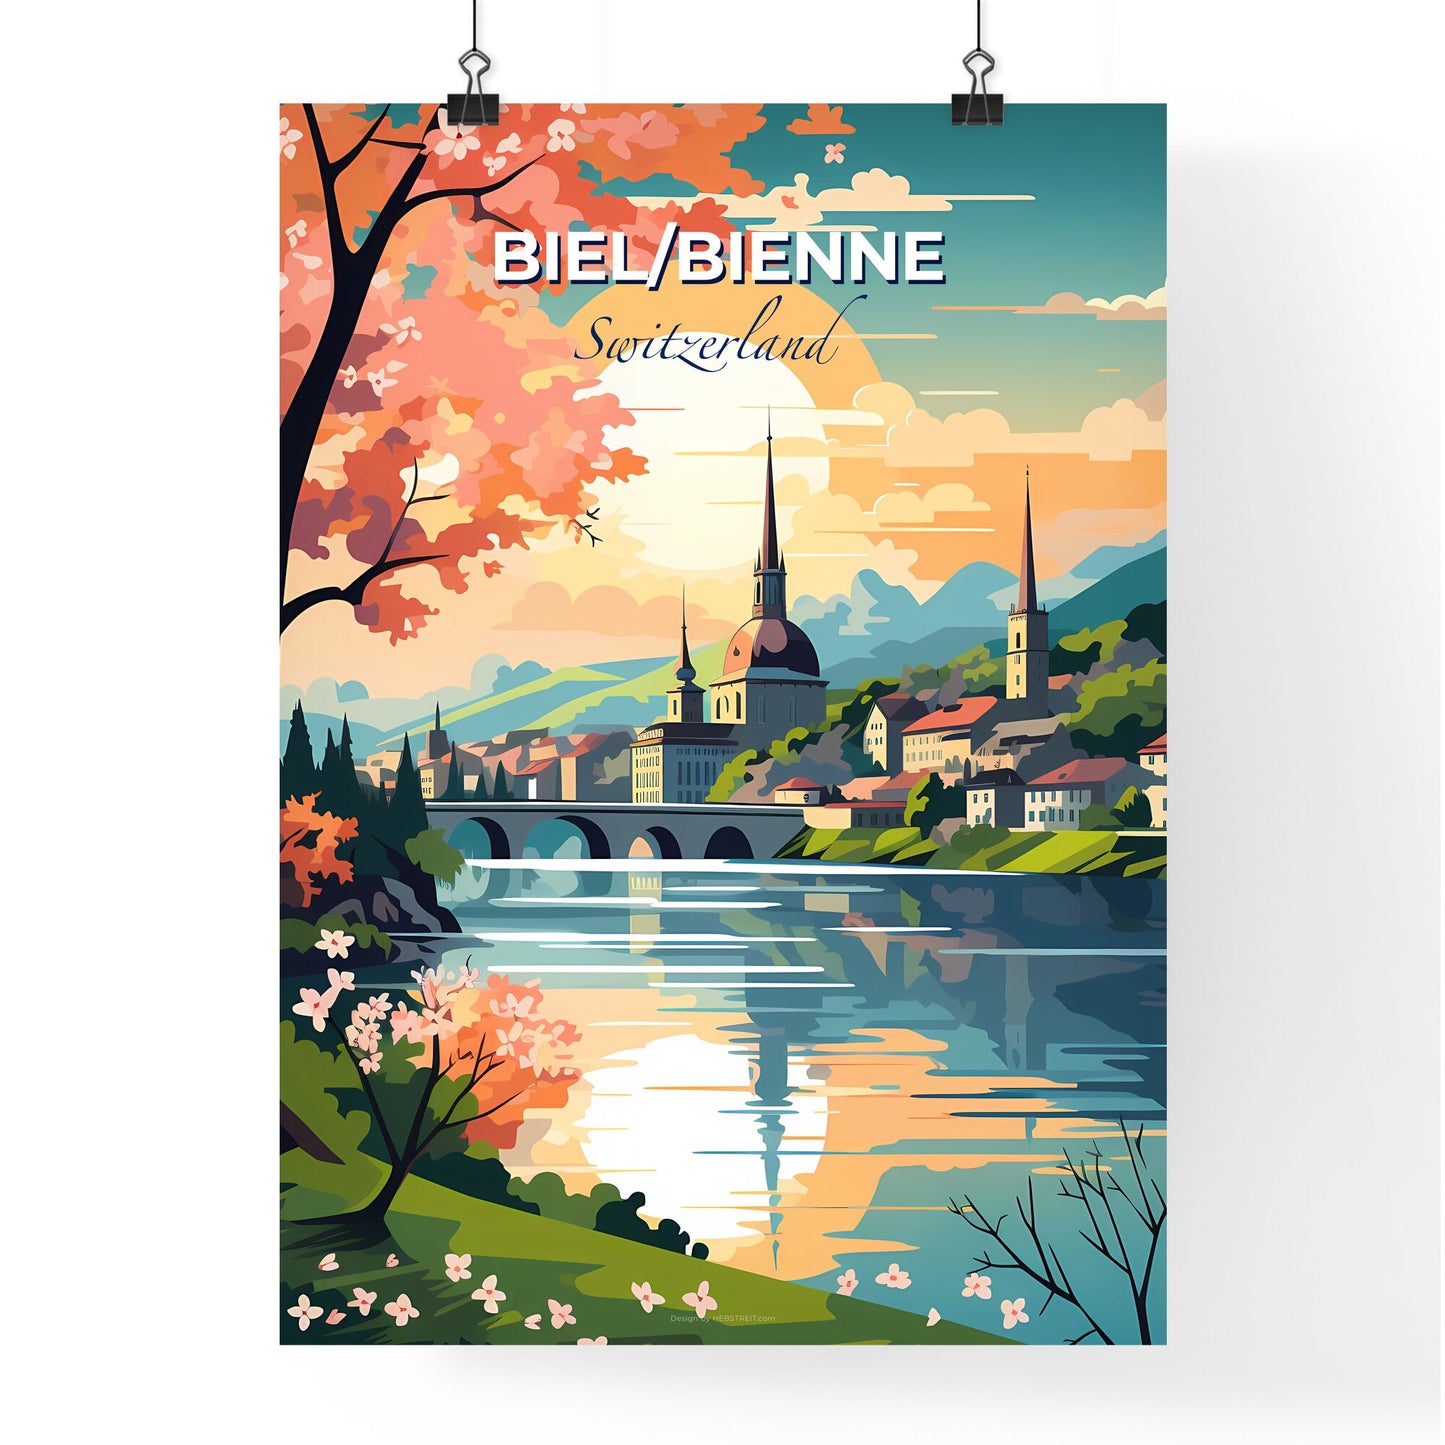 Biel/Bienne, Switzerland, A Poster of a painting of a town by a river Default Title